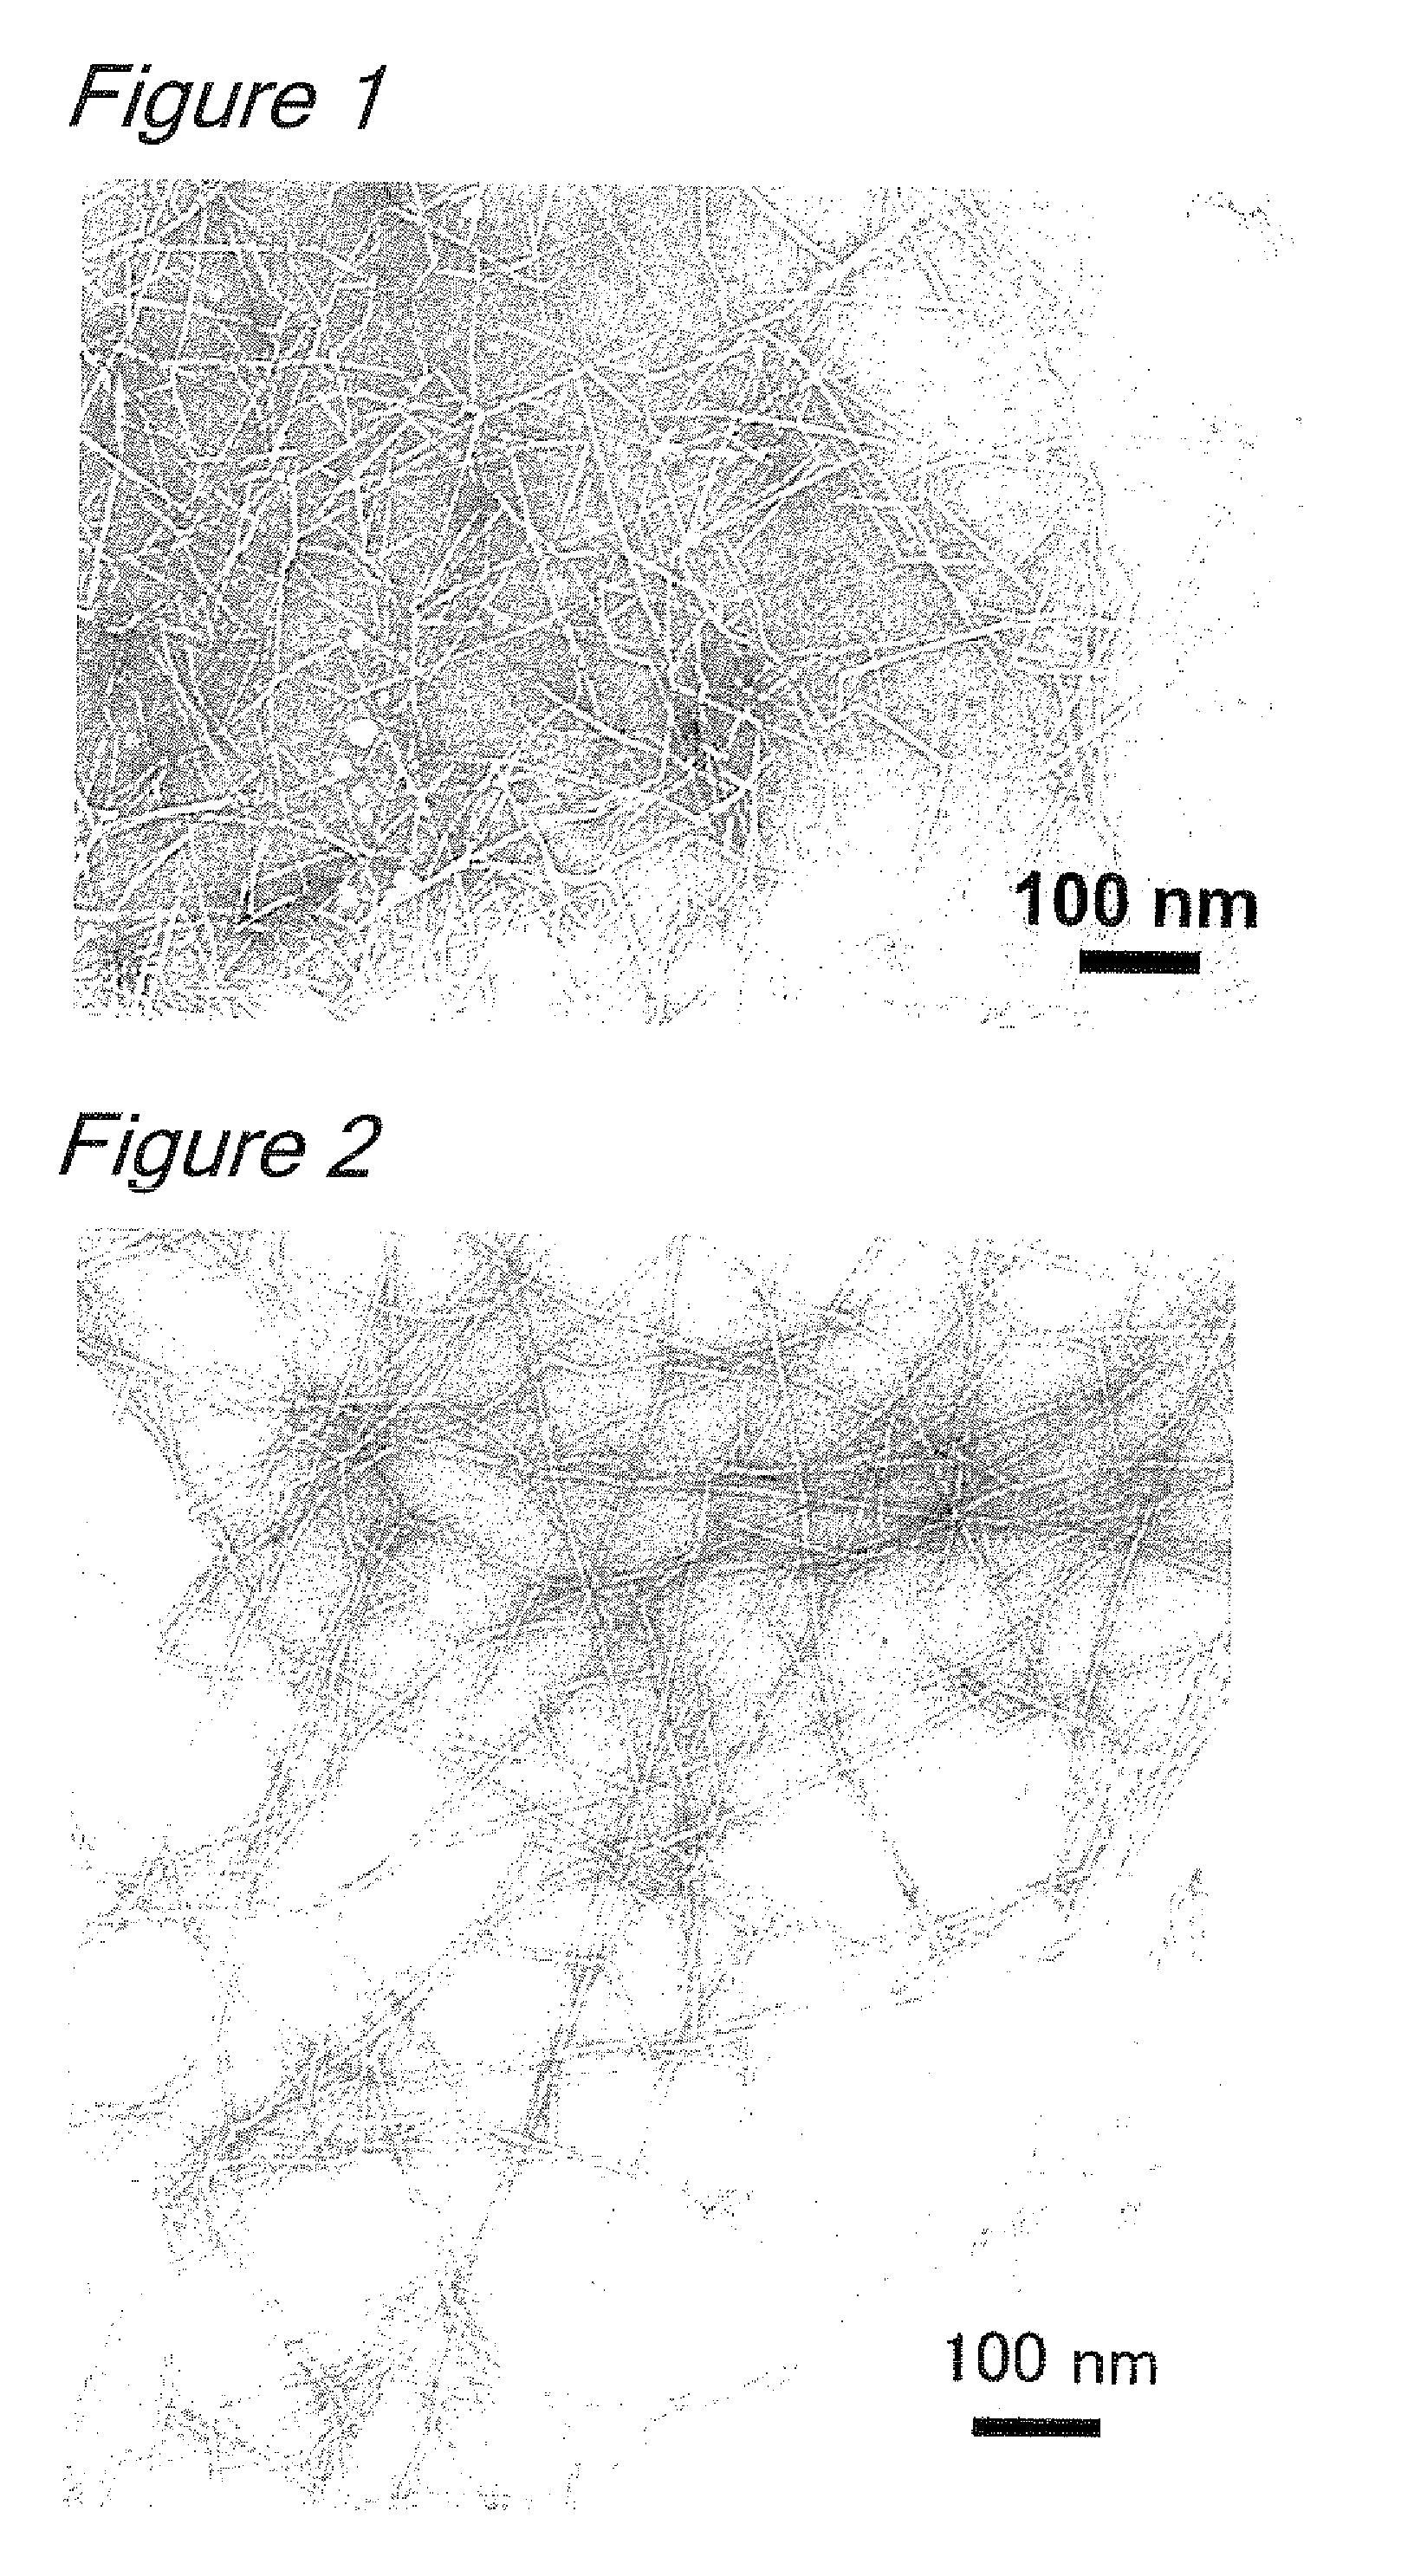 Processes for producing cellulose nanofibers, cellulose oxidation catalysts and methods for oxidizing cellulose